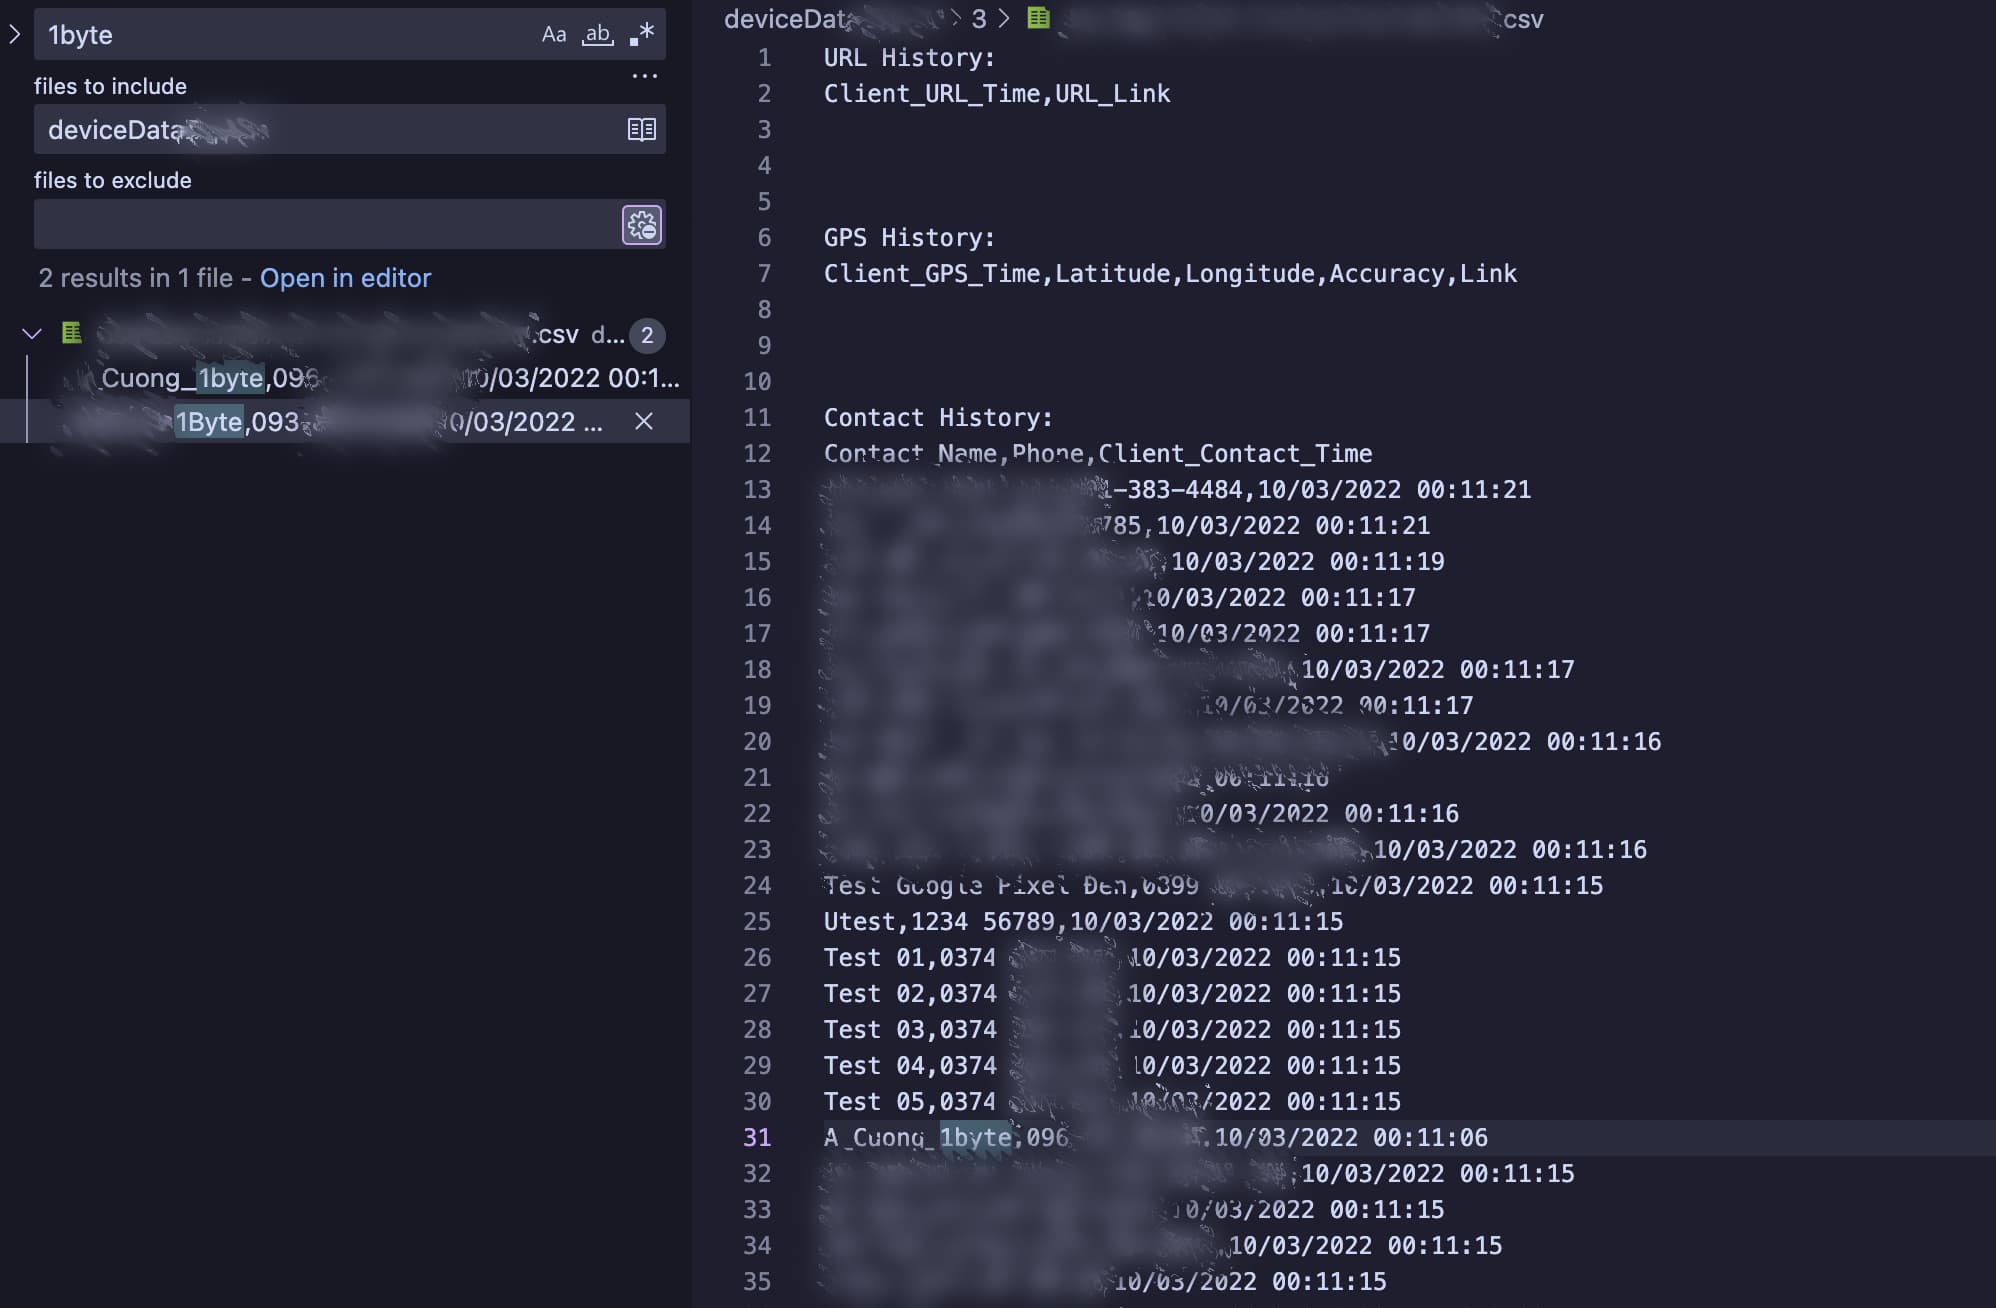 a heavily redacted screenshot of visual studio code, showing a csv file as a search result for the term "1Byte" with various contacts related to test devices and 1Byte employees